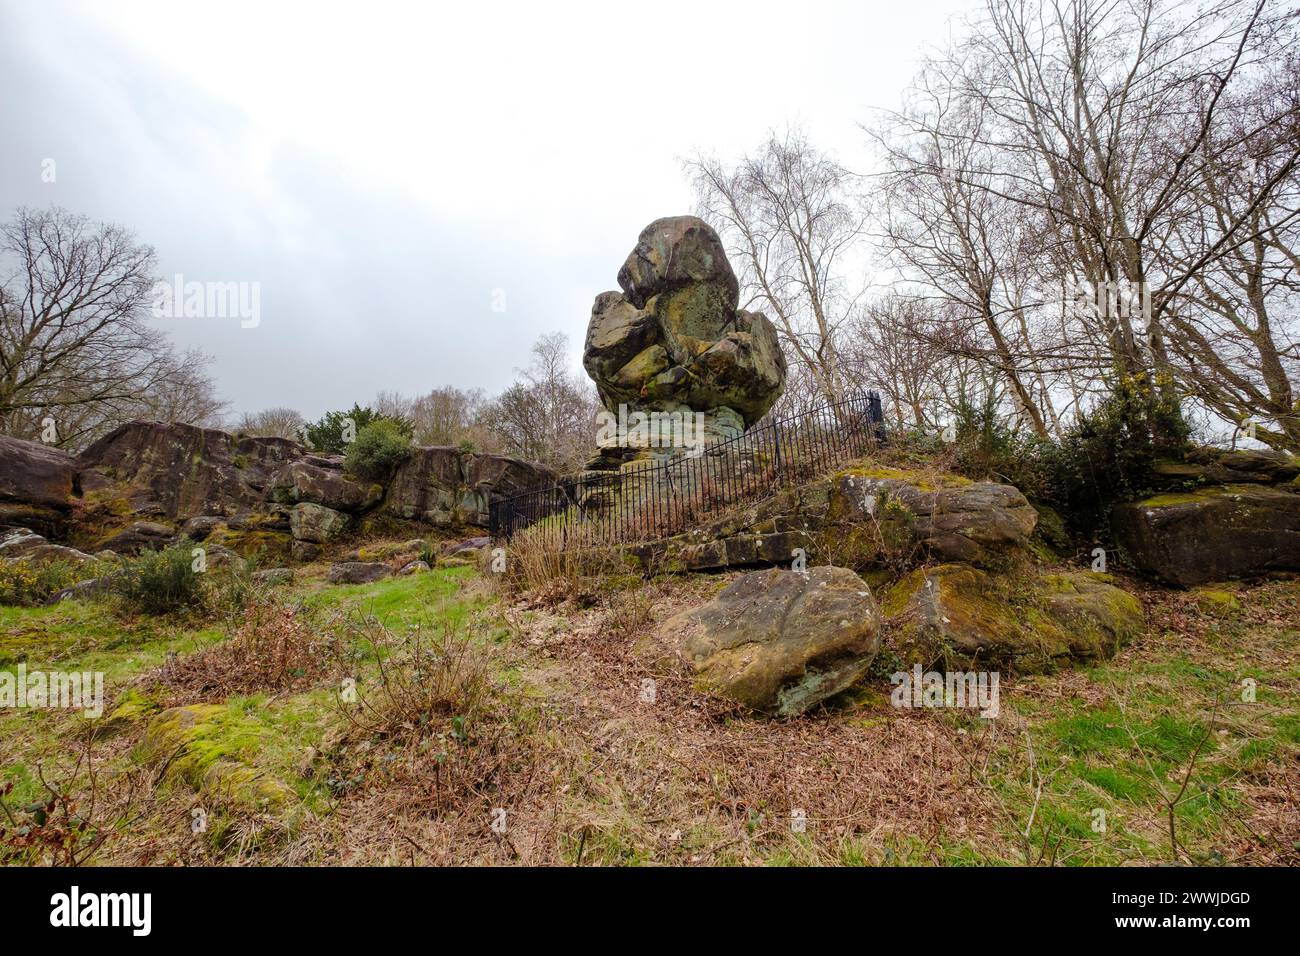 Ancient Sandstone rock formations at Tunbridge Wells Rusthall Common laid down during the ice age and eroded by wind & water into spectacular shapes. Stock Photo